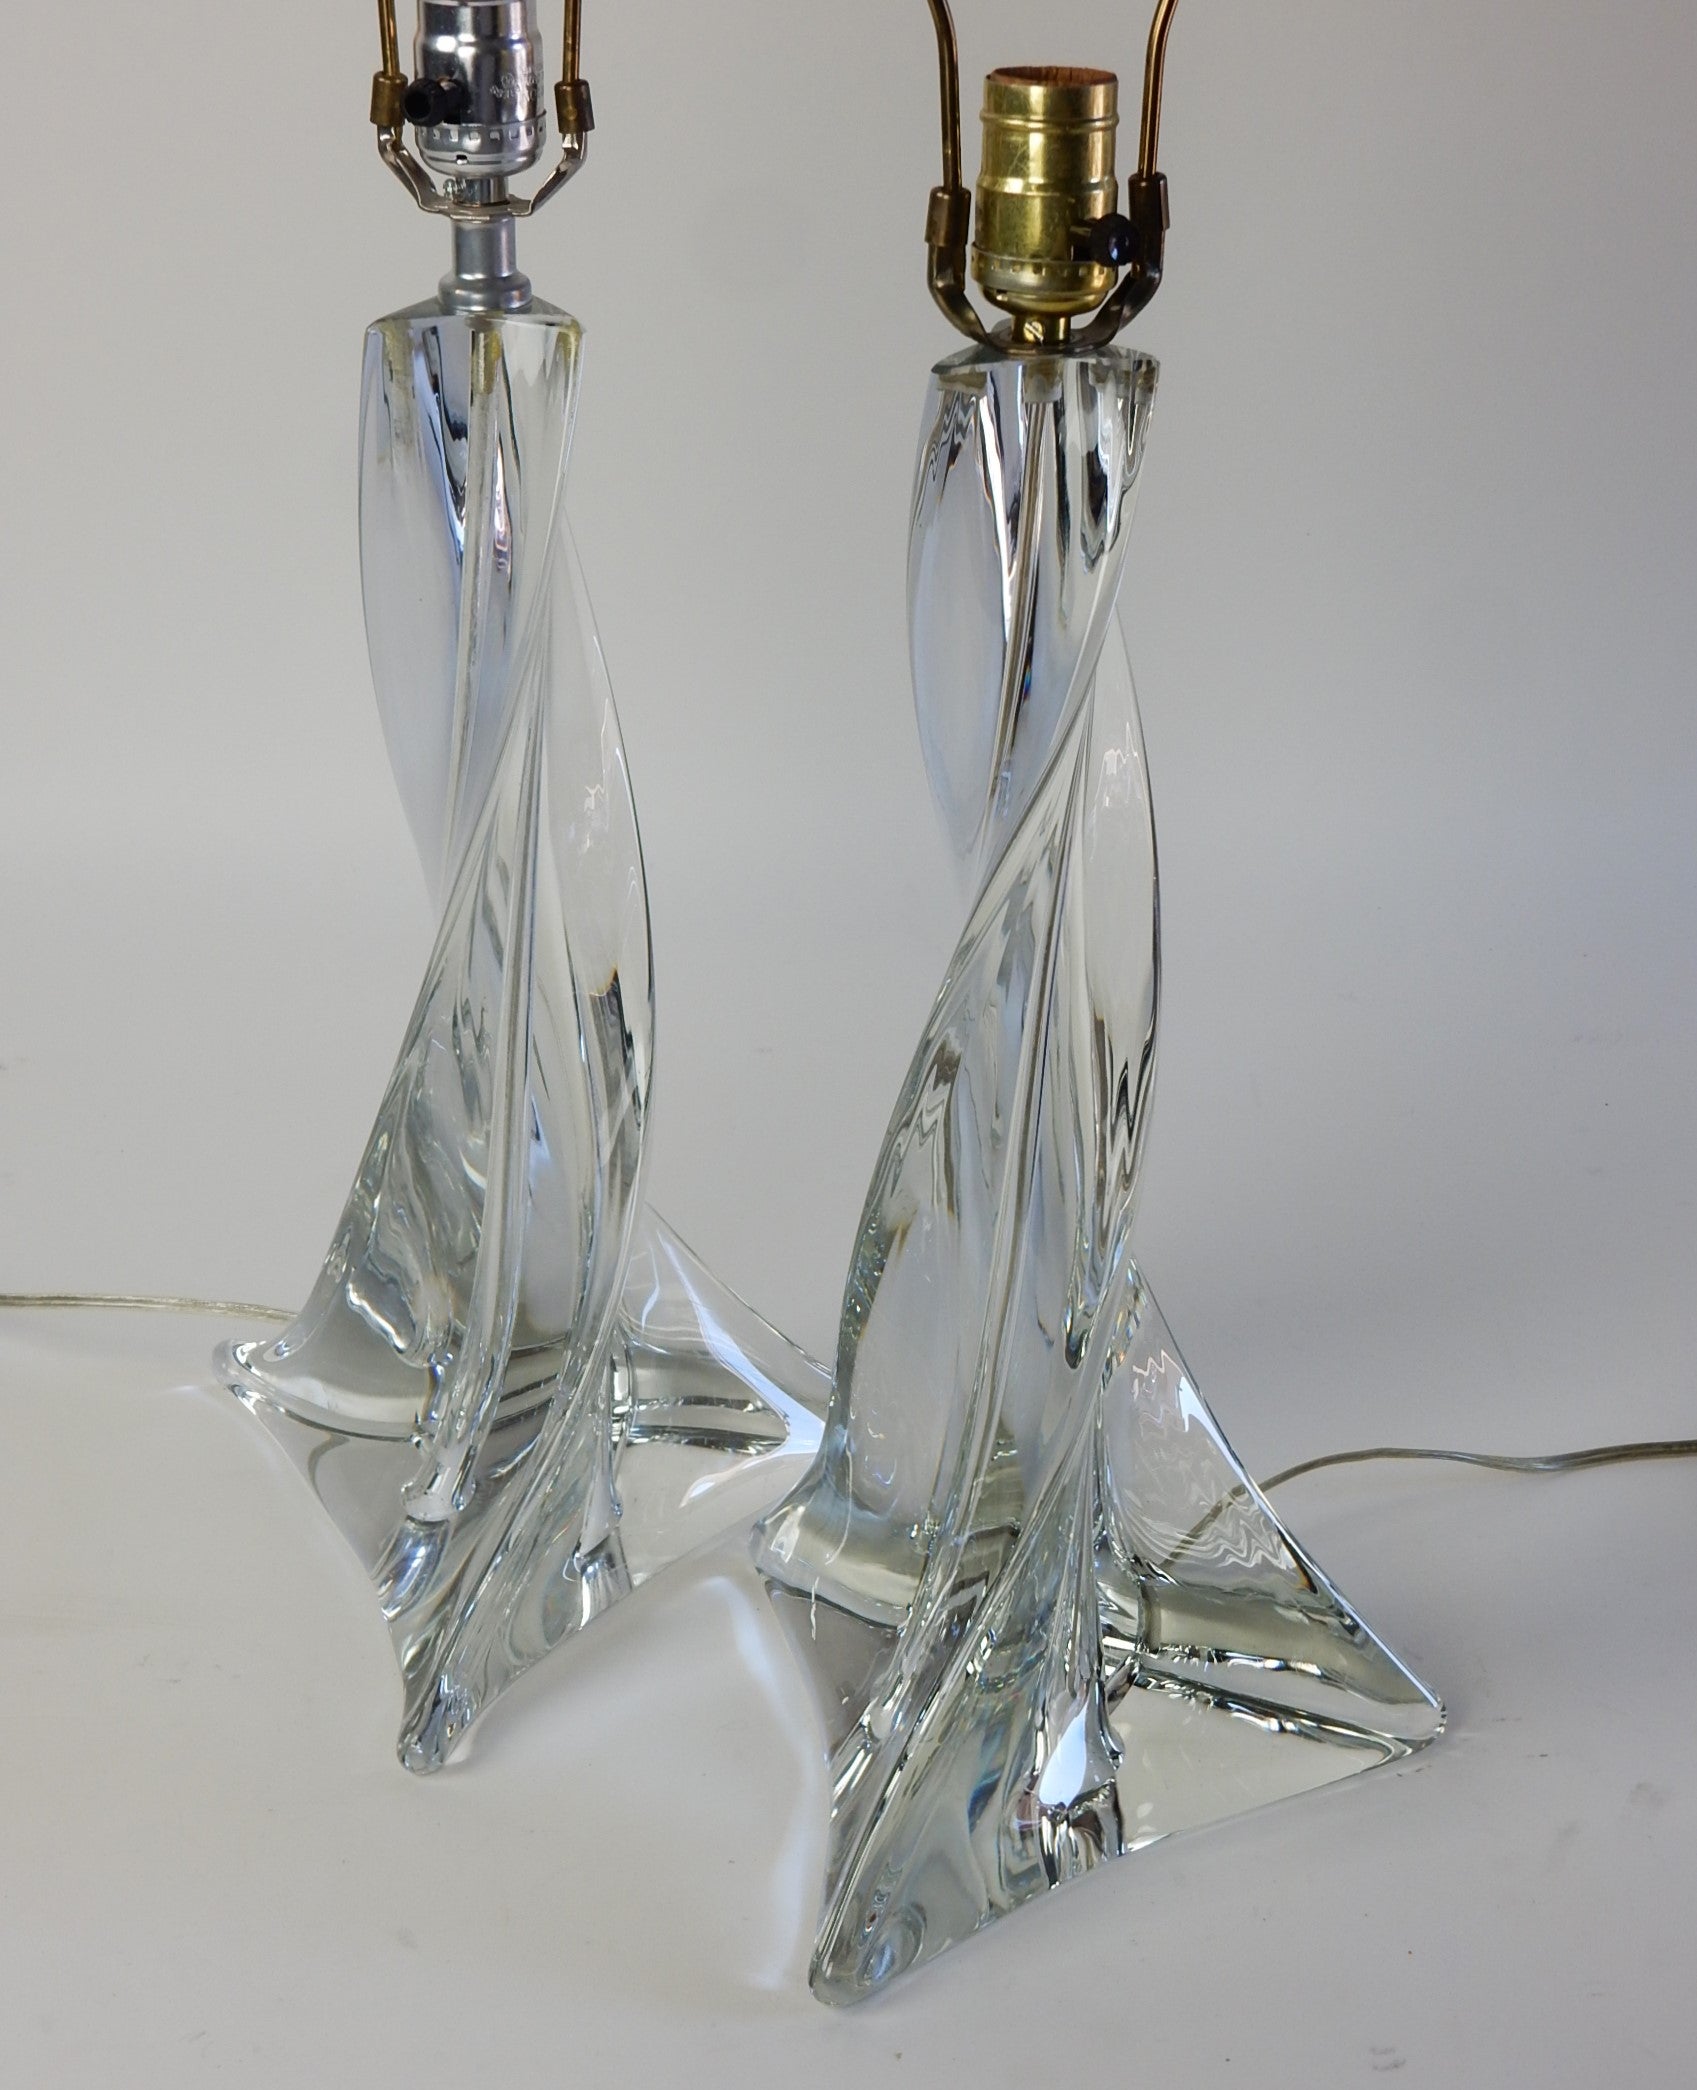 A pair of vintage art glass table lamps by St. Louis Crystal of France.
Bespoke crystal glass forms that produce a dazzling refractive gem-like sparkle. They are fabulous!
Both lamps are acid etched 